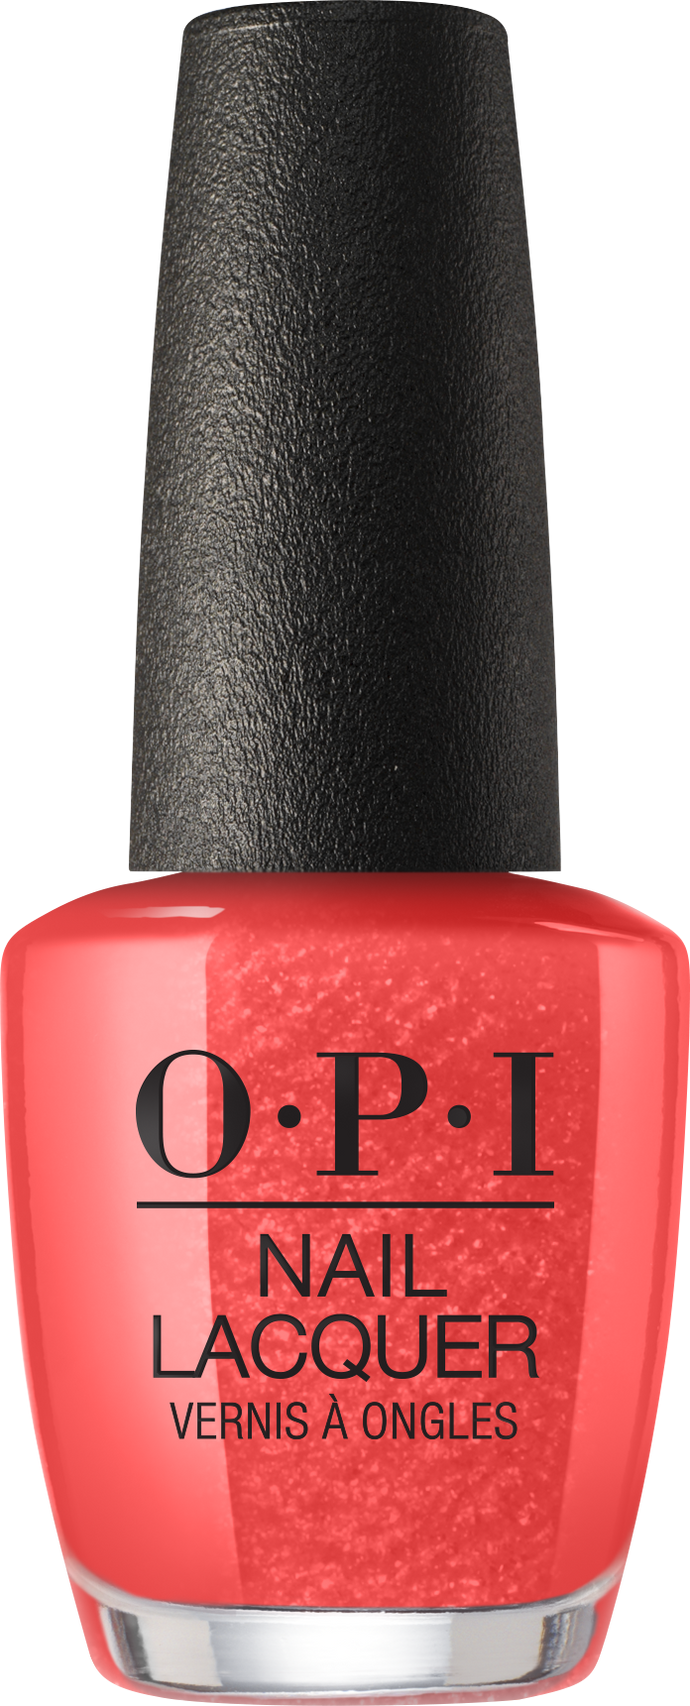 OPI OPI Nail Lacquer - Now Museum, Now You Dont 0.5 oz - #NLL21 - Sleek Nail